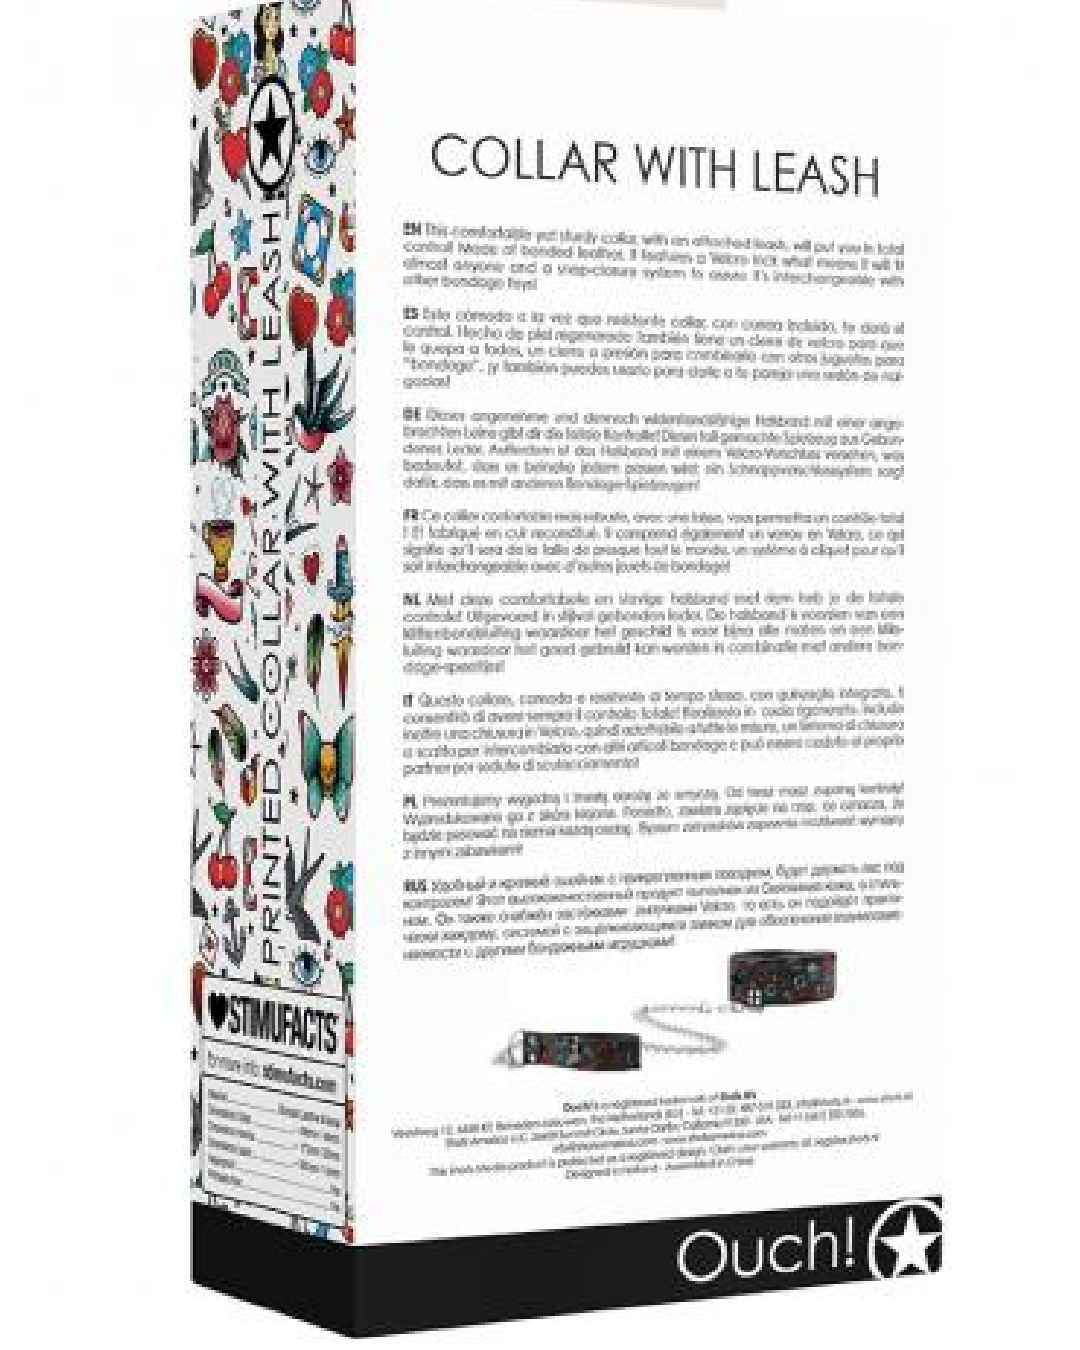 Ouch Old School Tattoo Style Printed Collar with Leash  back of box 